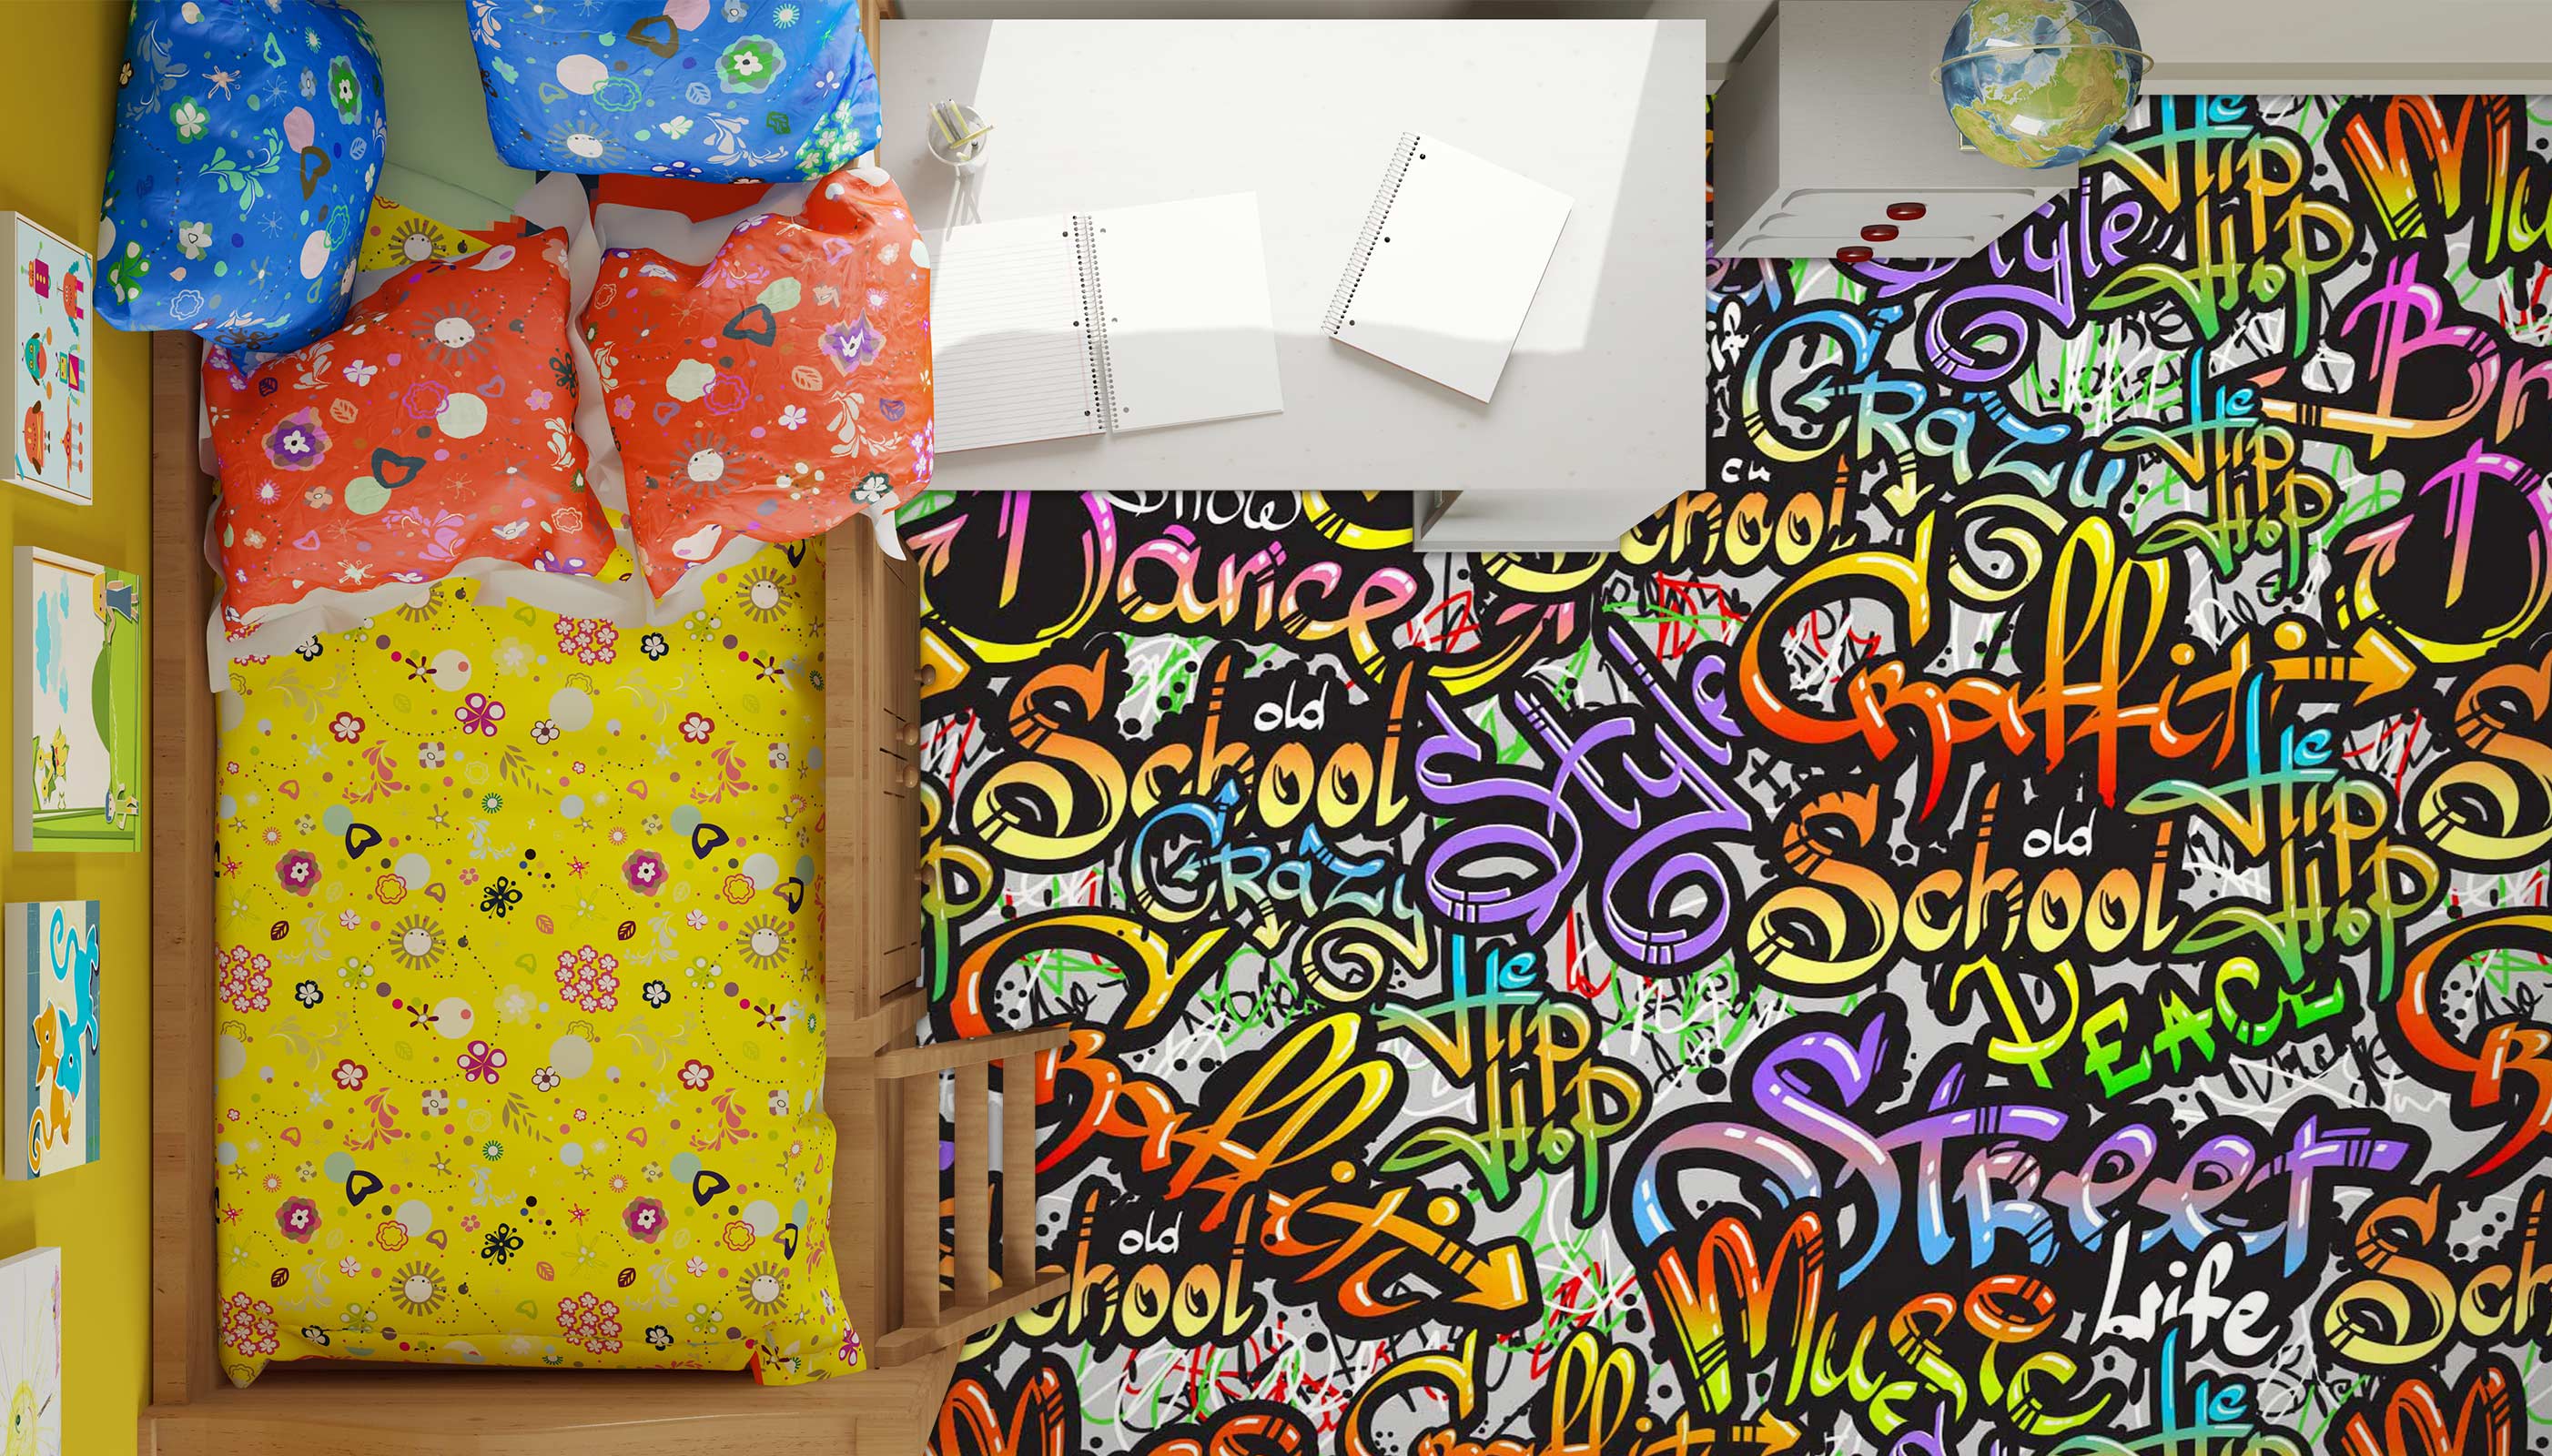 3D Colorful Art Letters 1148 Floor Mural  Wallpaper Murals Self-Adhesive Removable Print Epoxy